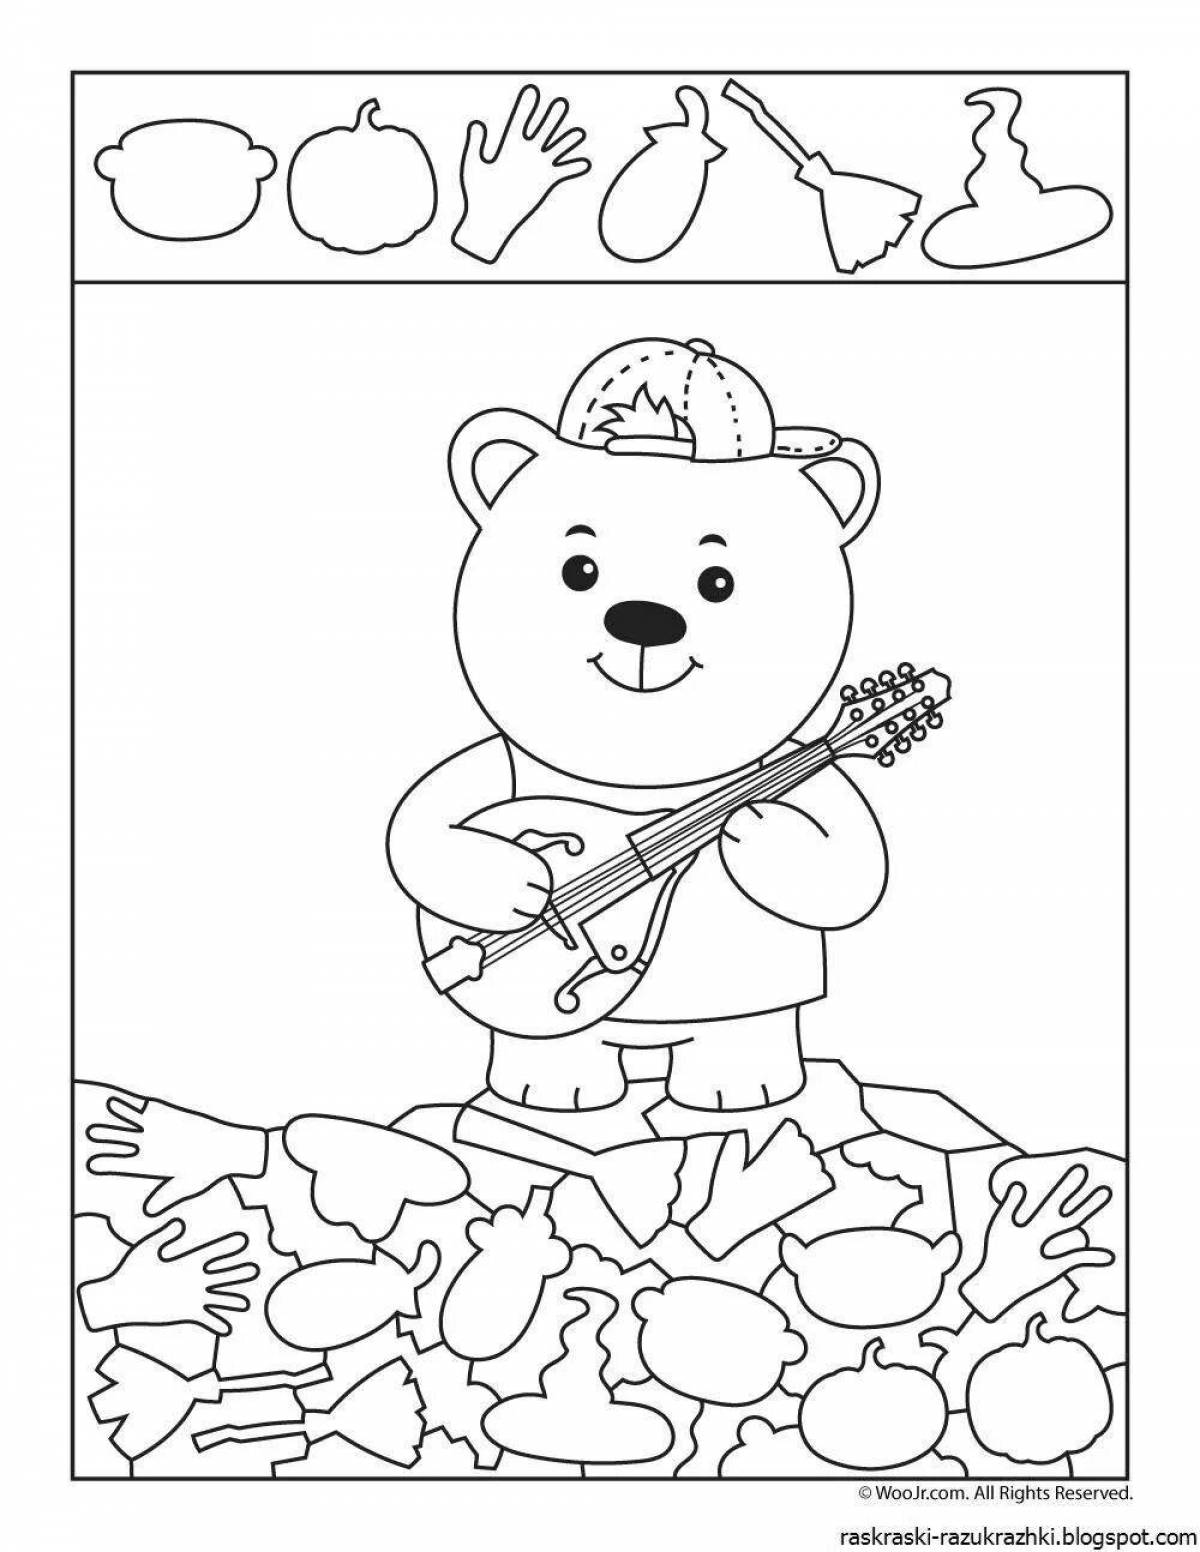 Dynamic focus coloring page